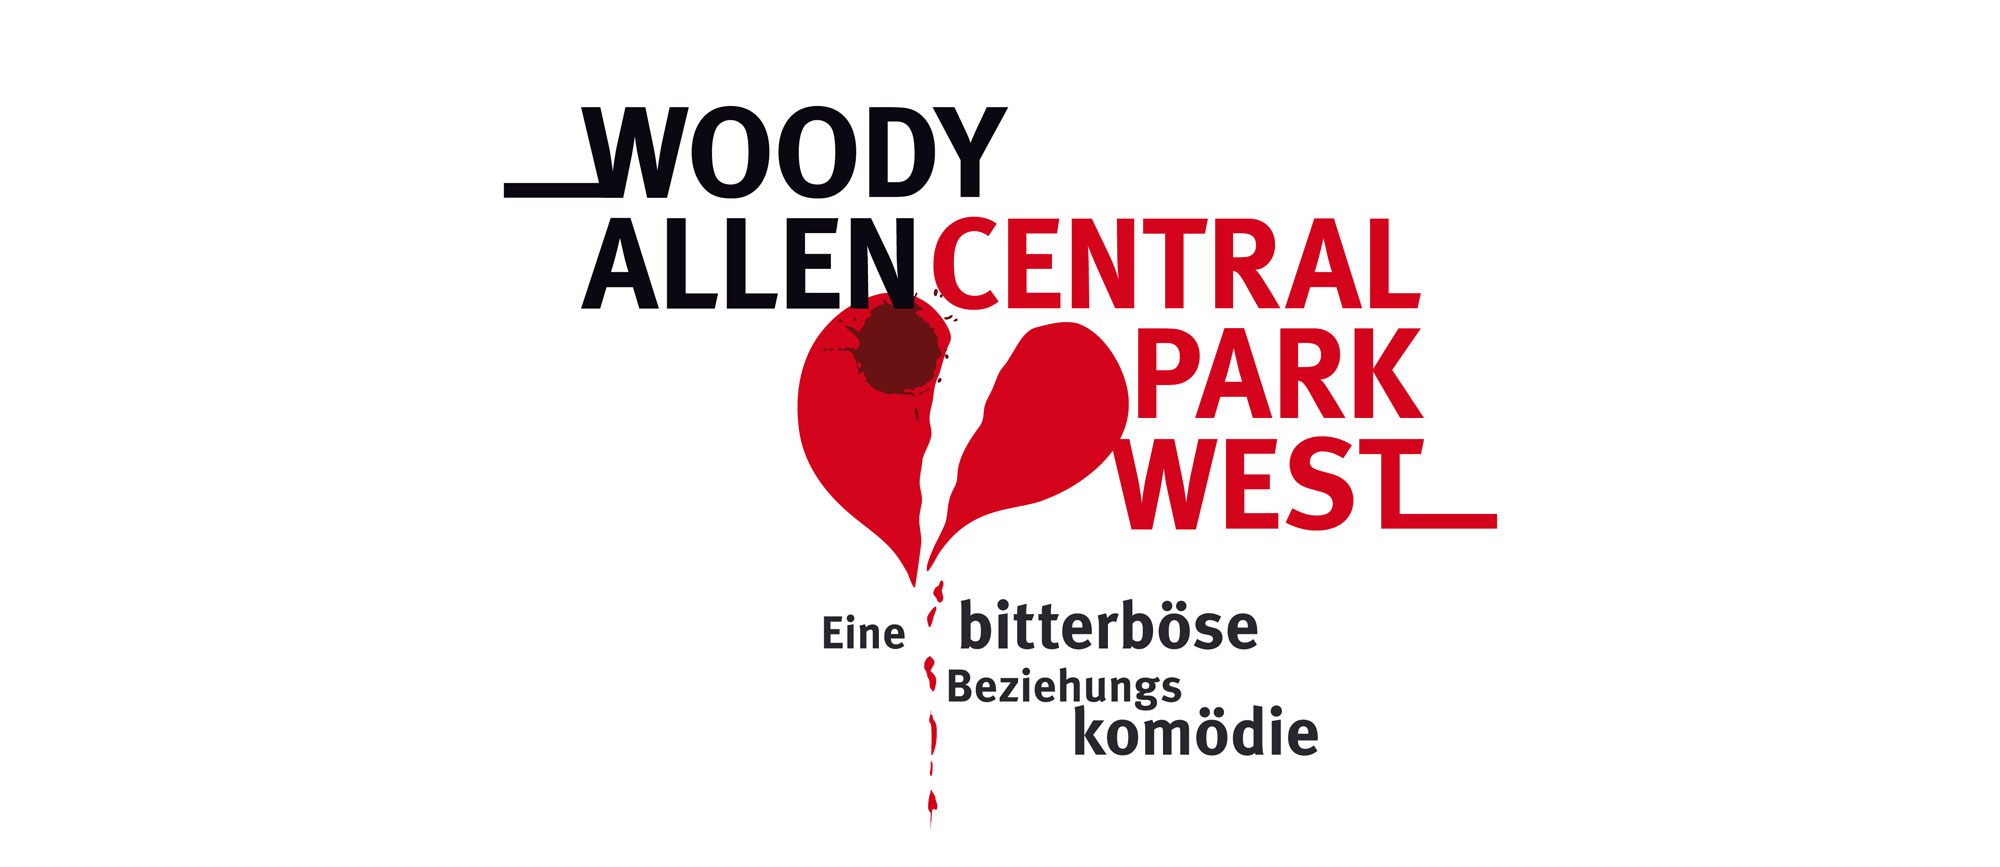 Central-Park-West-Theatergruppe-Olympiadorf-muenchen-titel